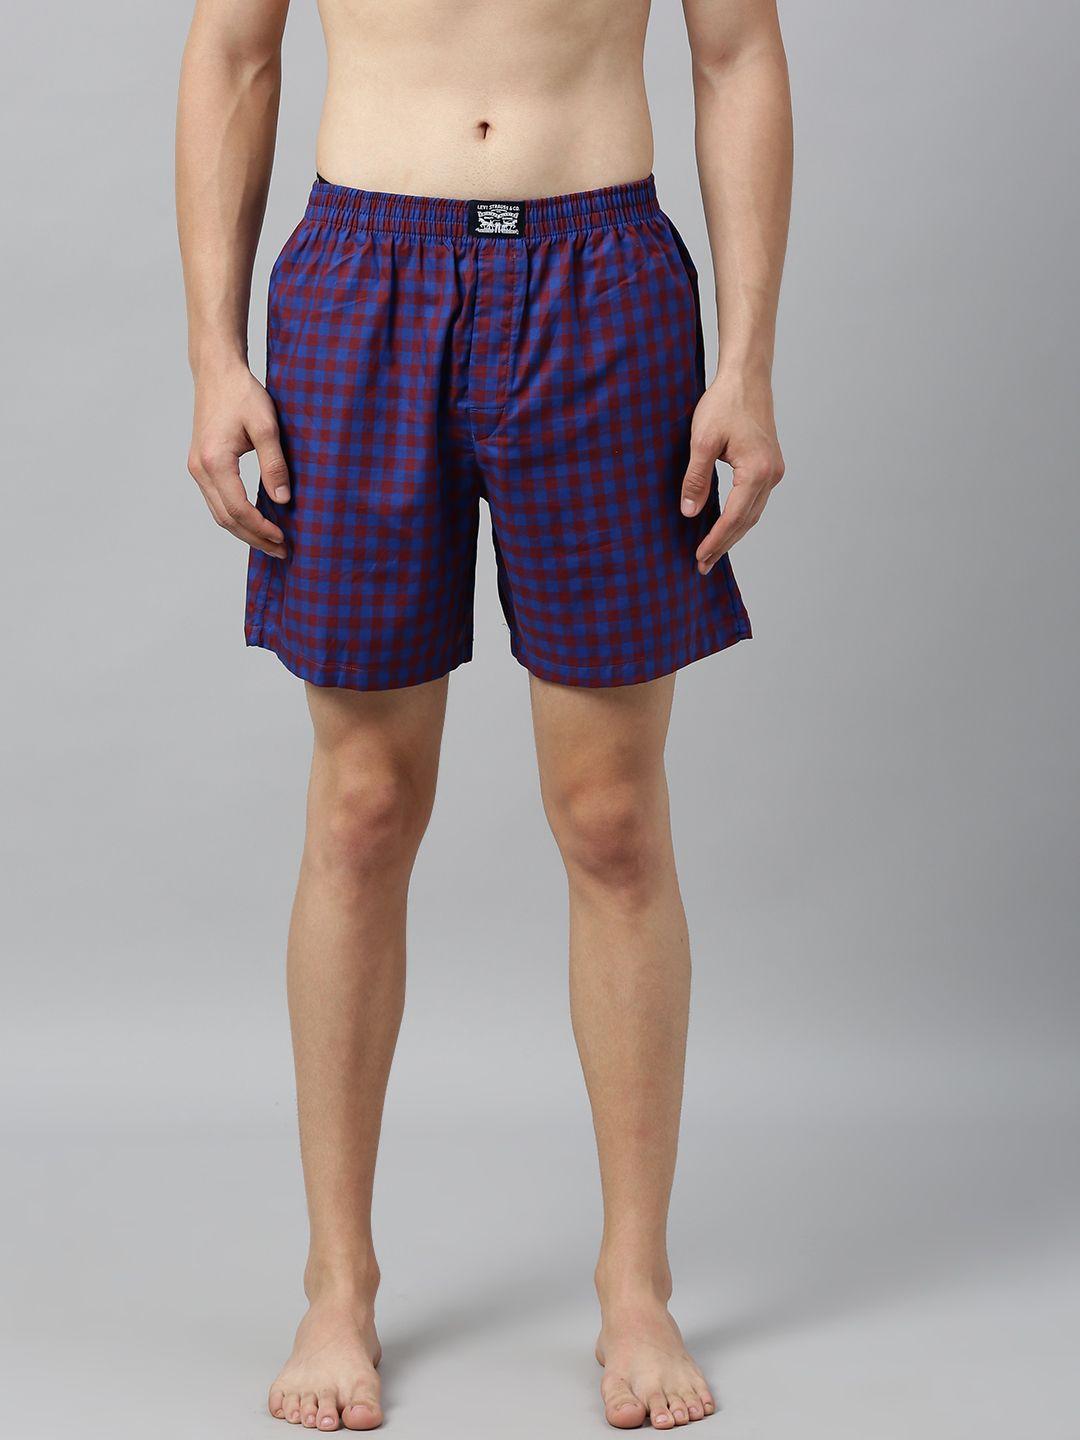 levis men checked smartskin technology woven cotton boxers with tag free comfort-024